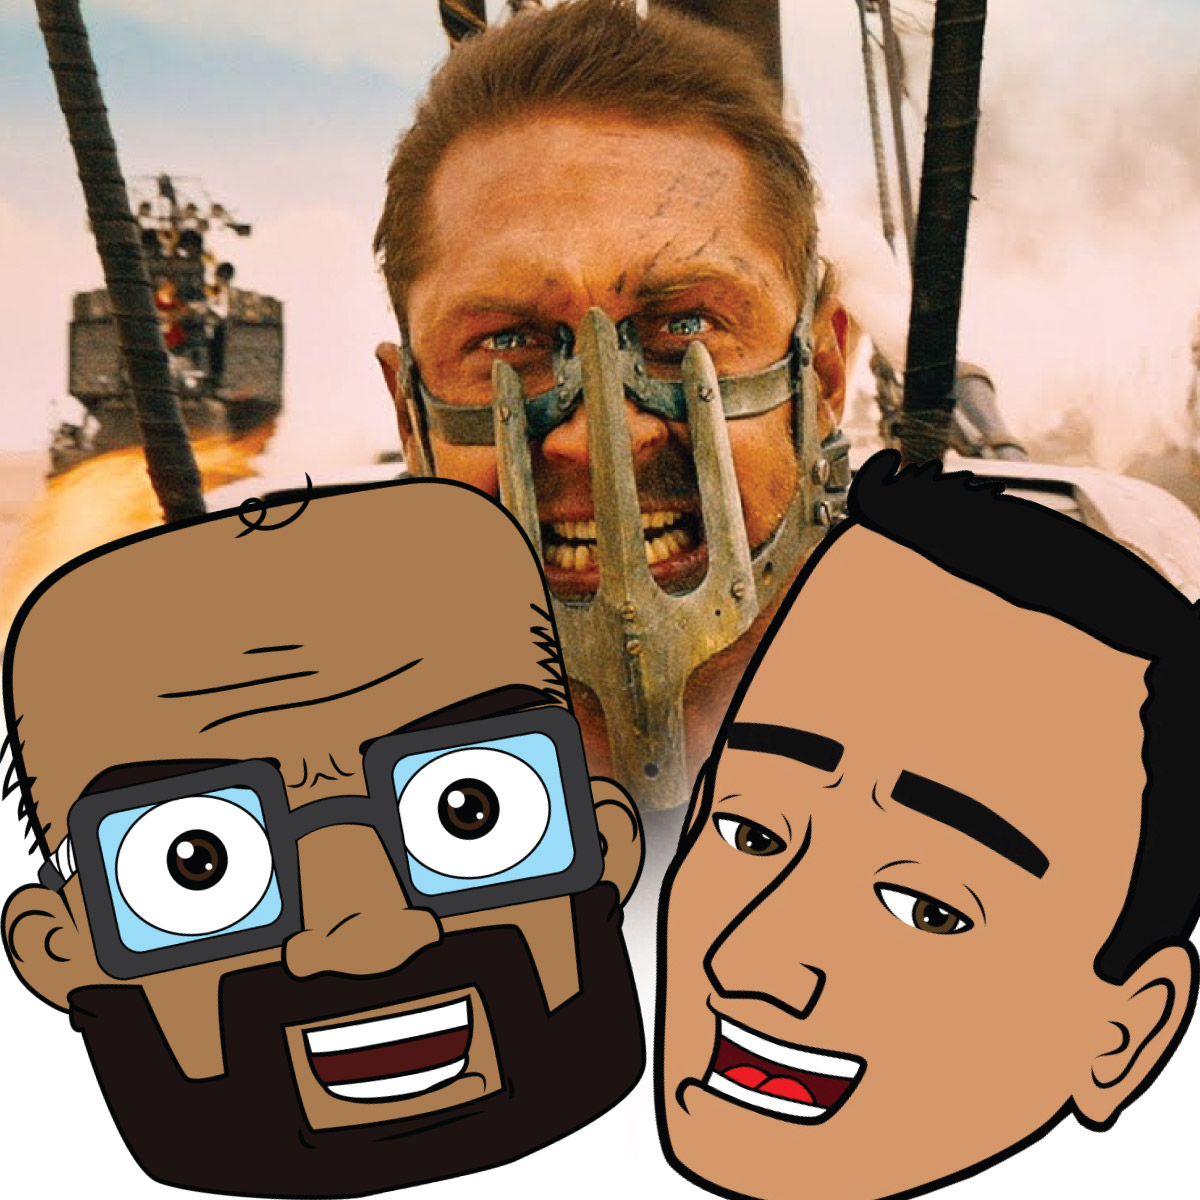 Mad Max Review - Our Pilot